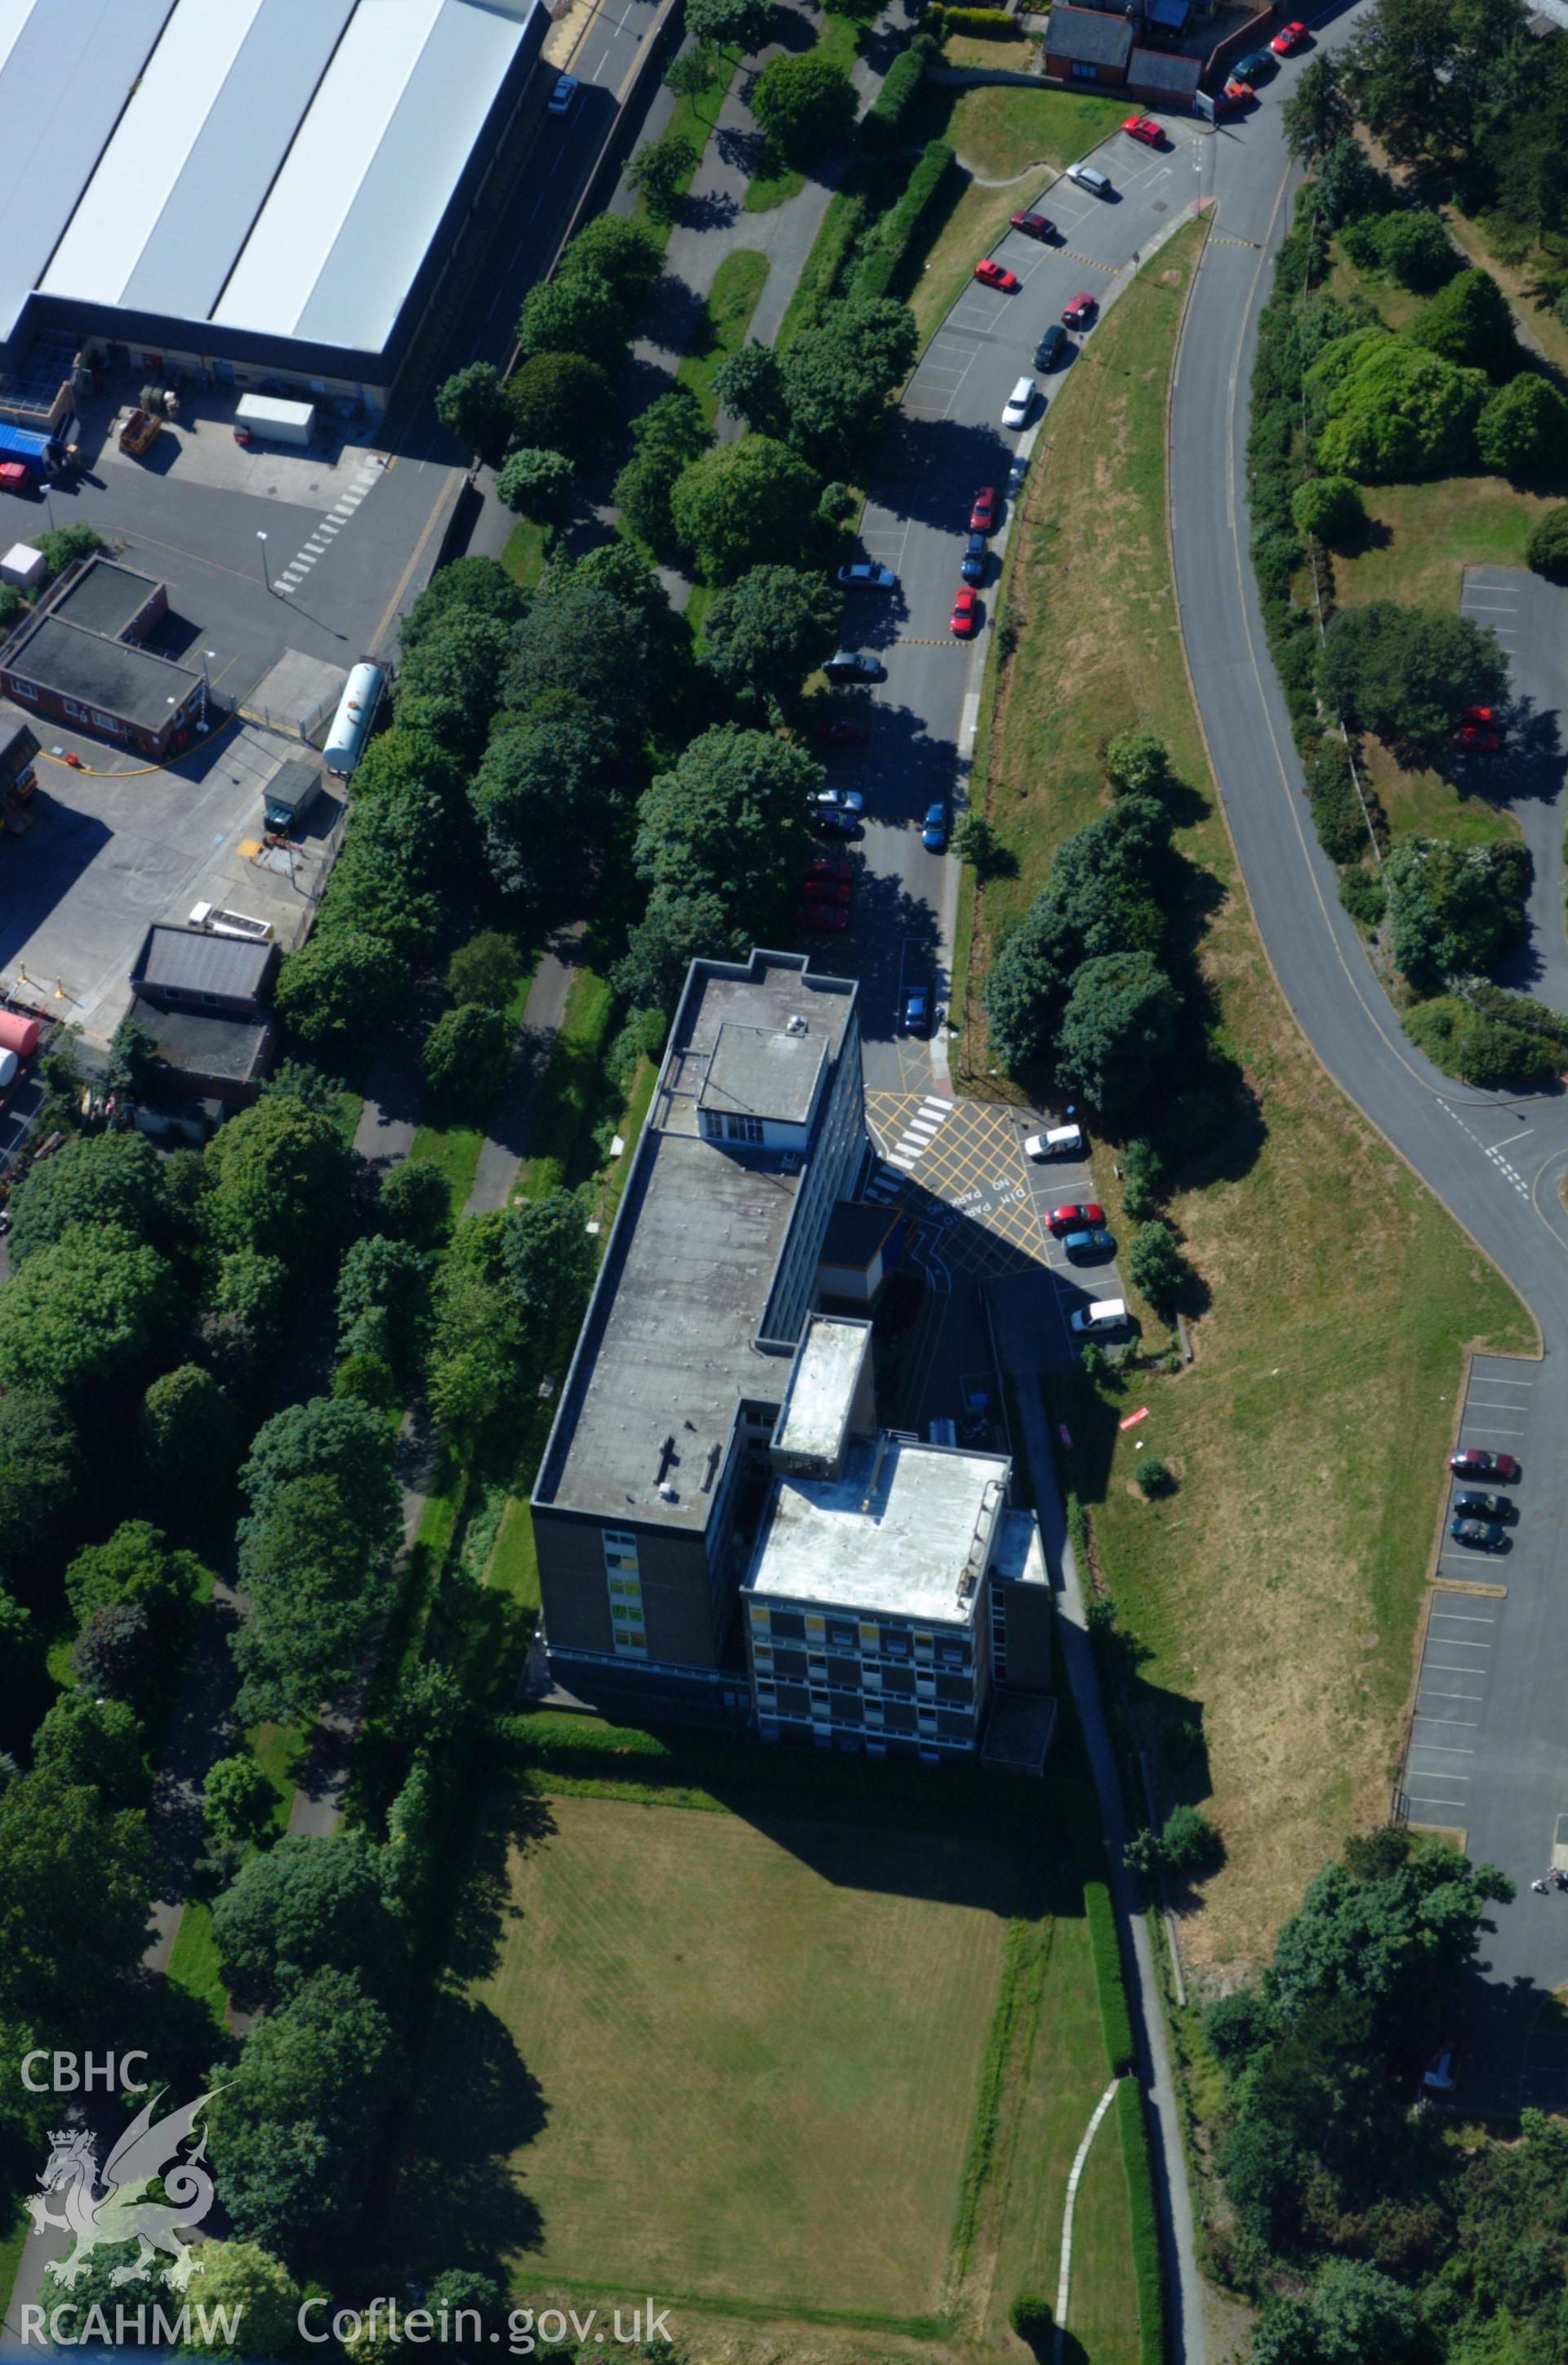 RCAHMW colour oblique aerial photograph of Crown building, Plas Crug, Aberystwyth taken on 14/06/2004 by Toby Driver